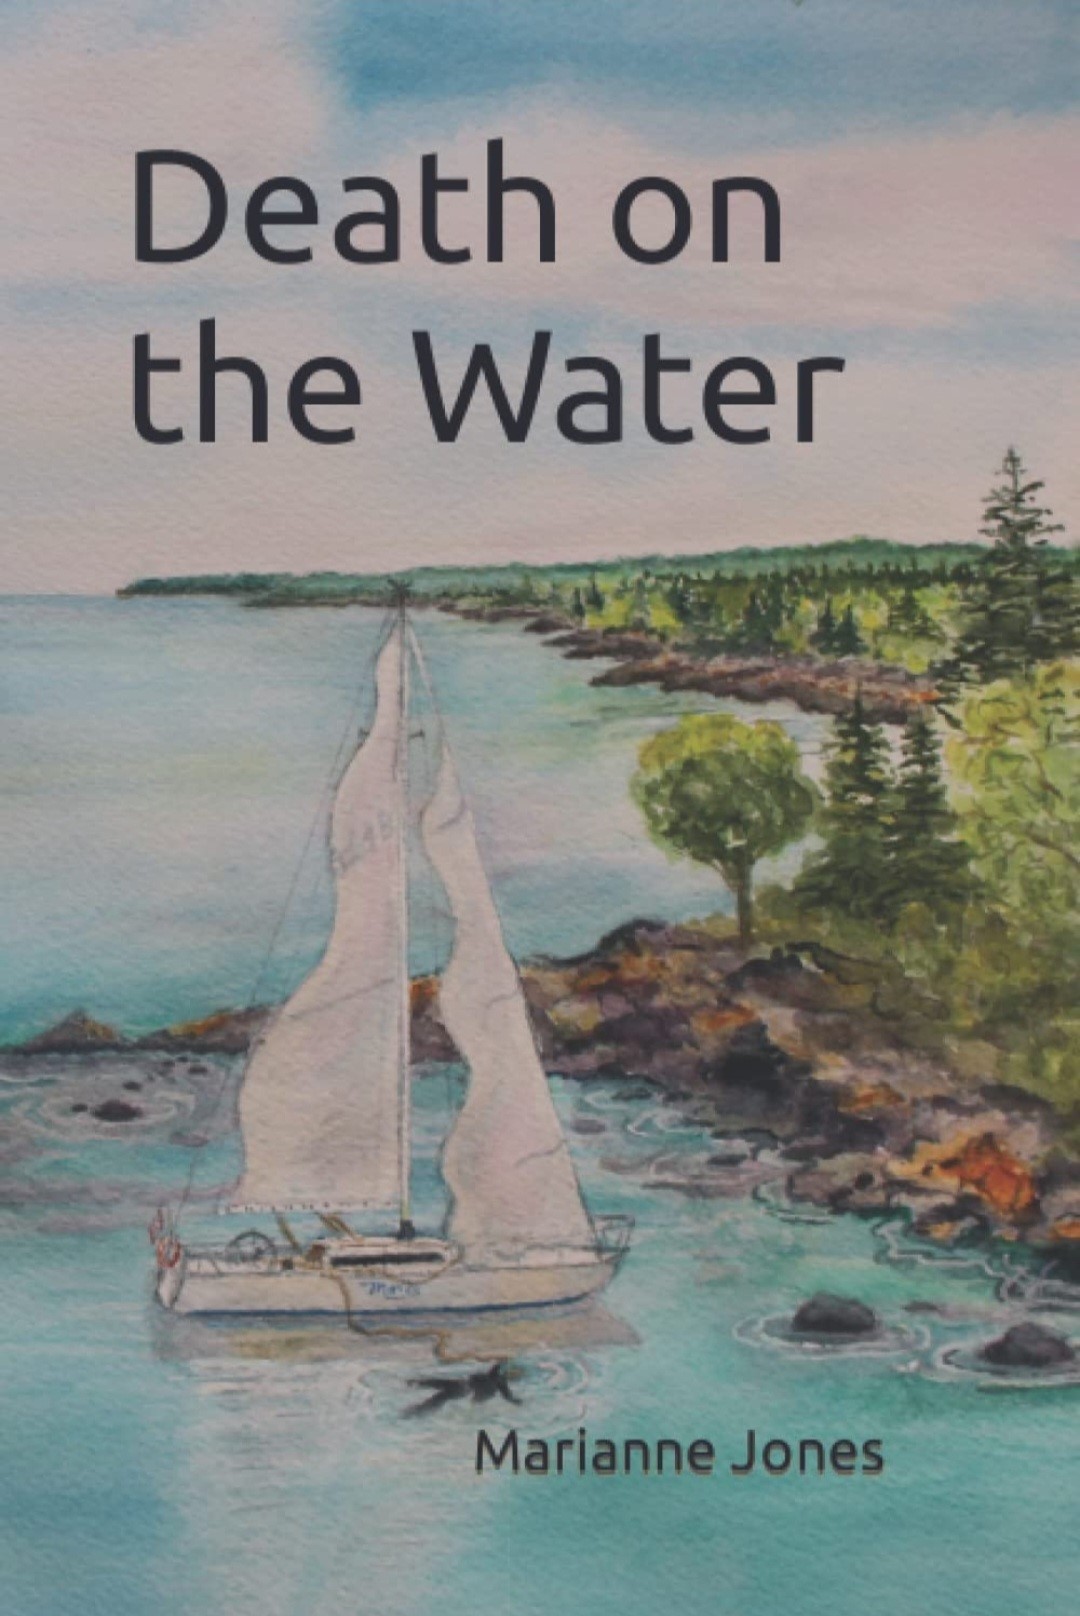 FREE: Death on the Water by Marianne Jones